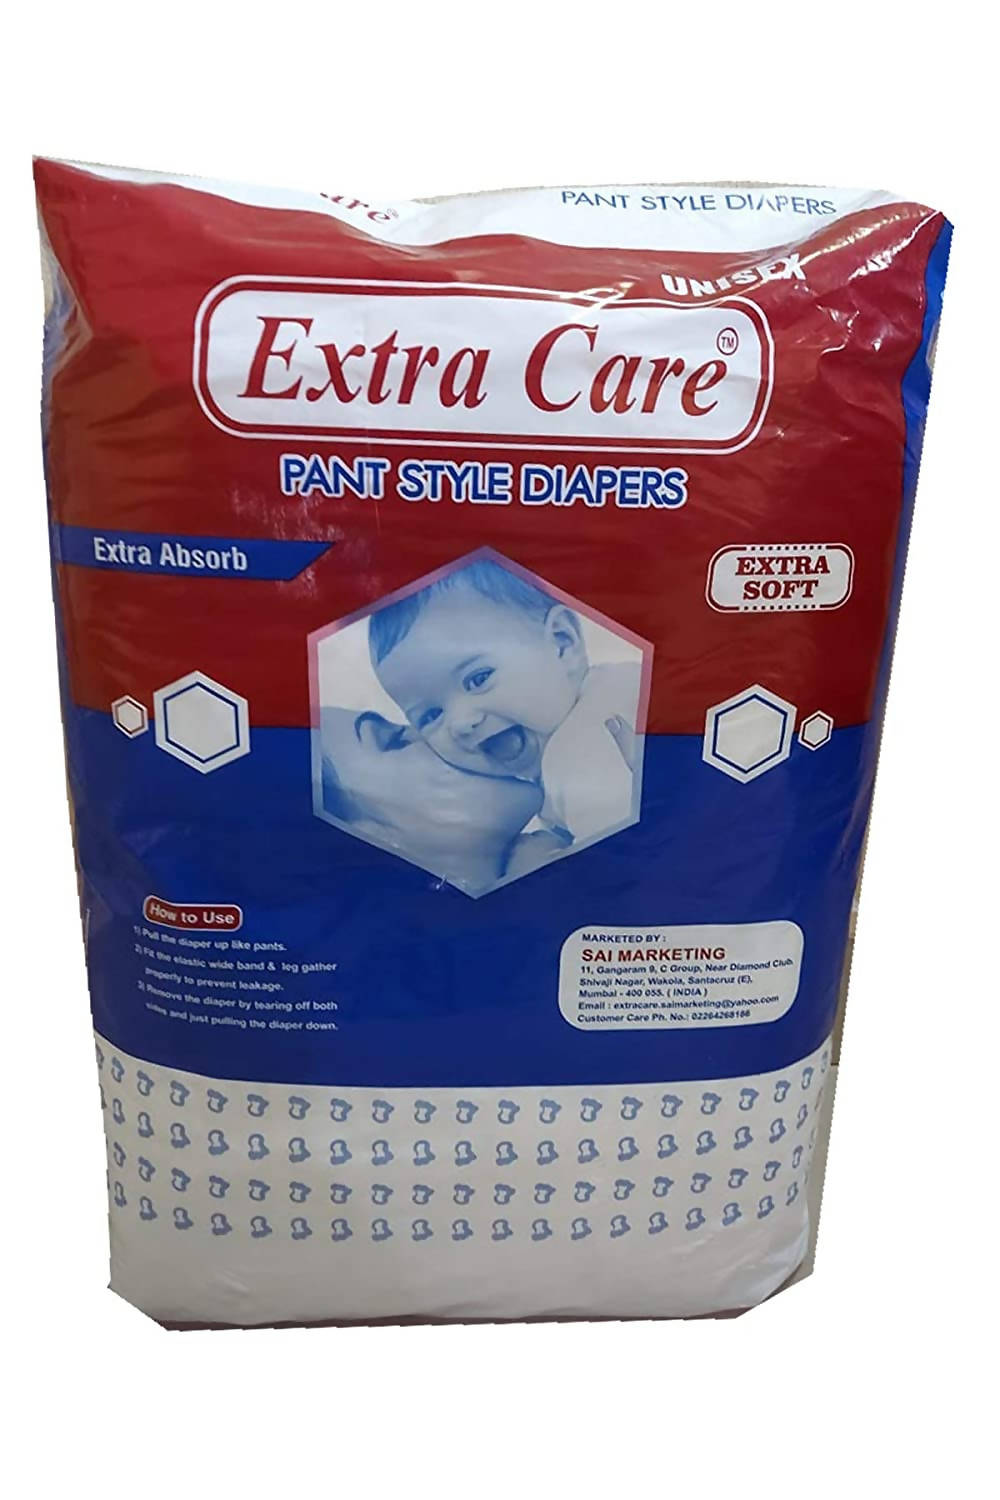 Extra Care Baby Pant Diaper XL size 50 piece - 14 kg & above